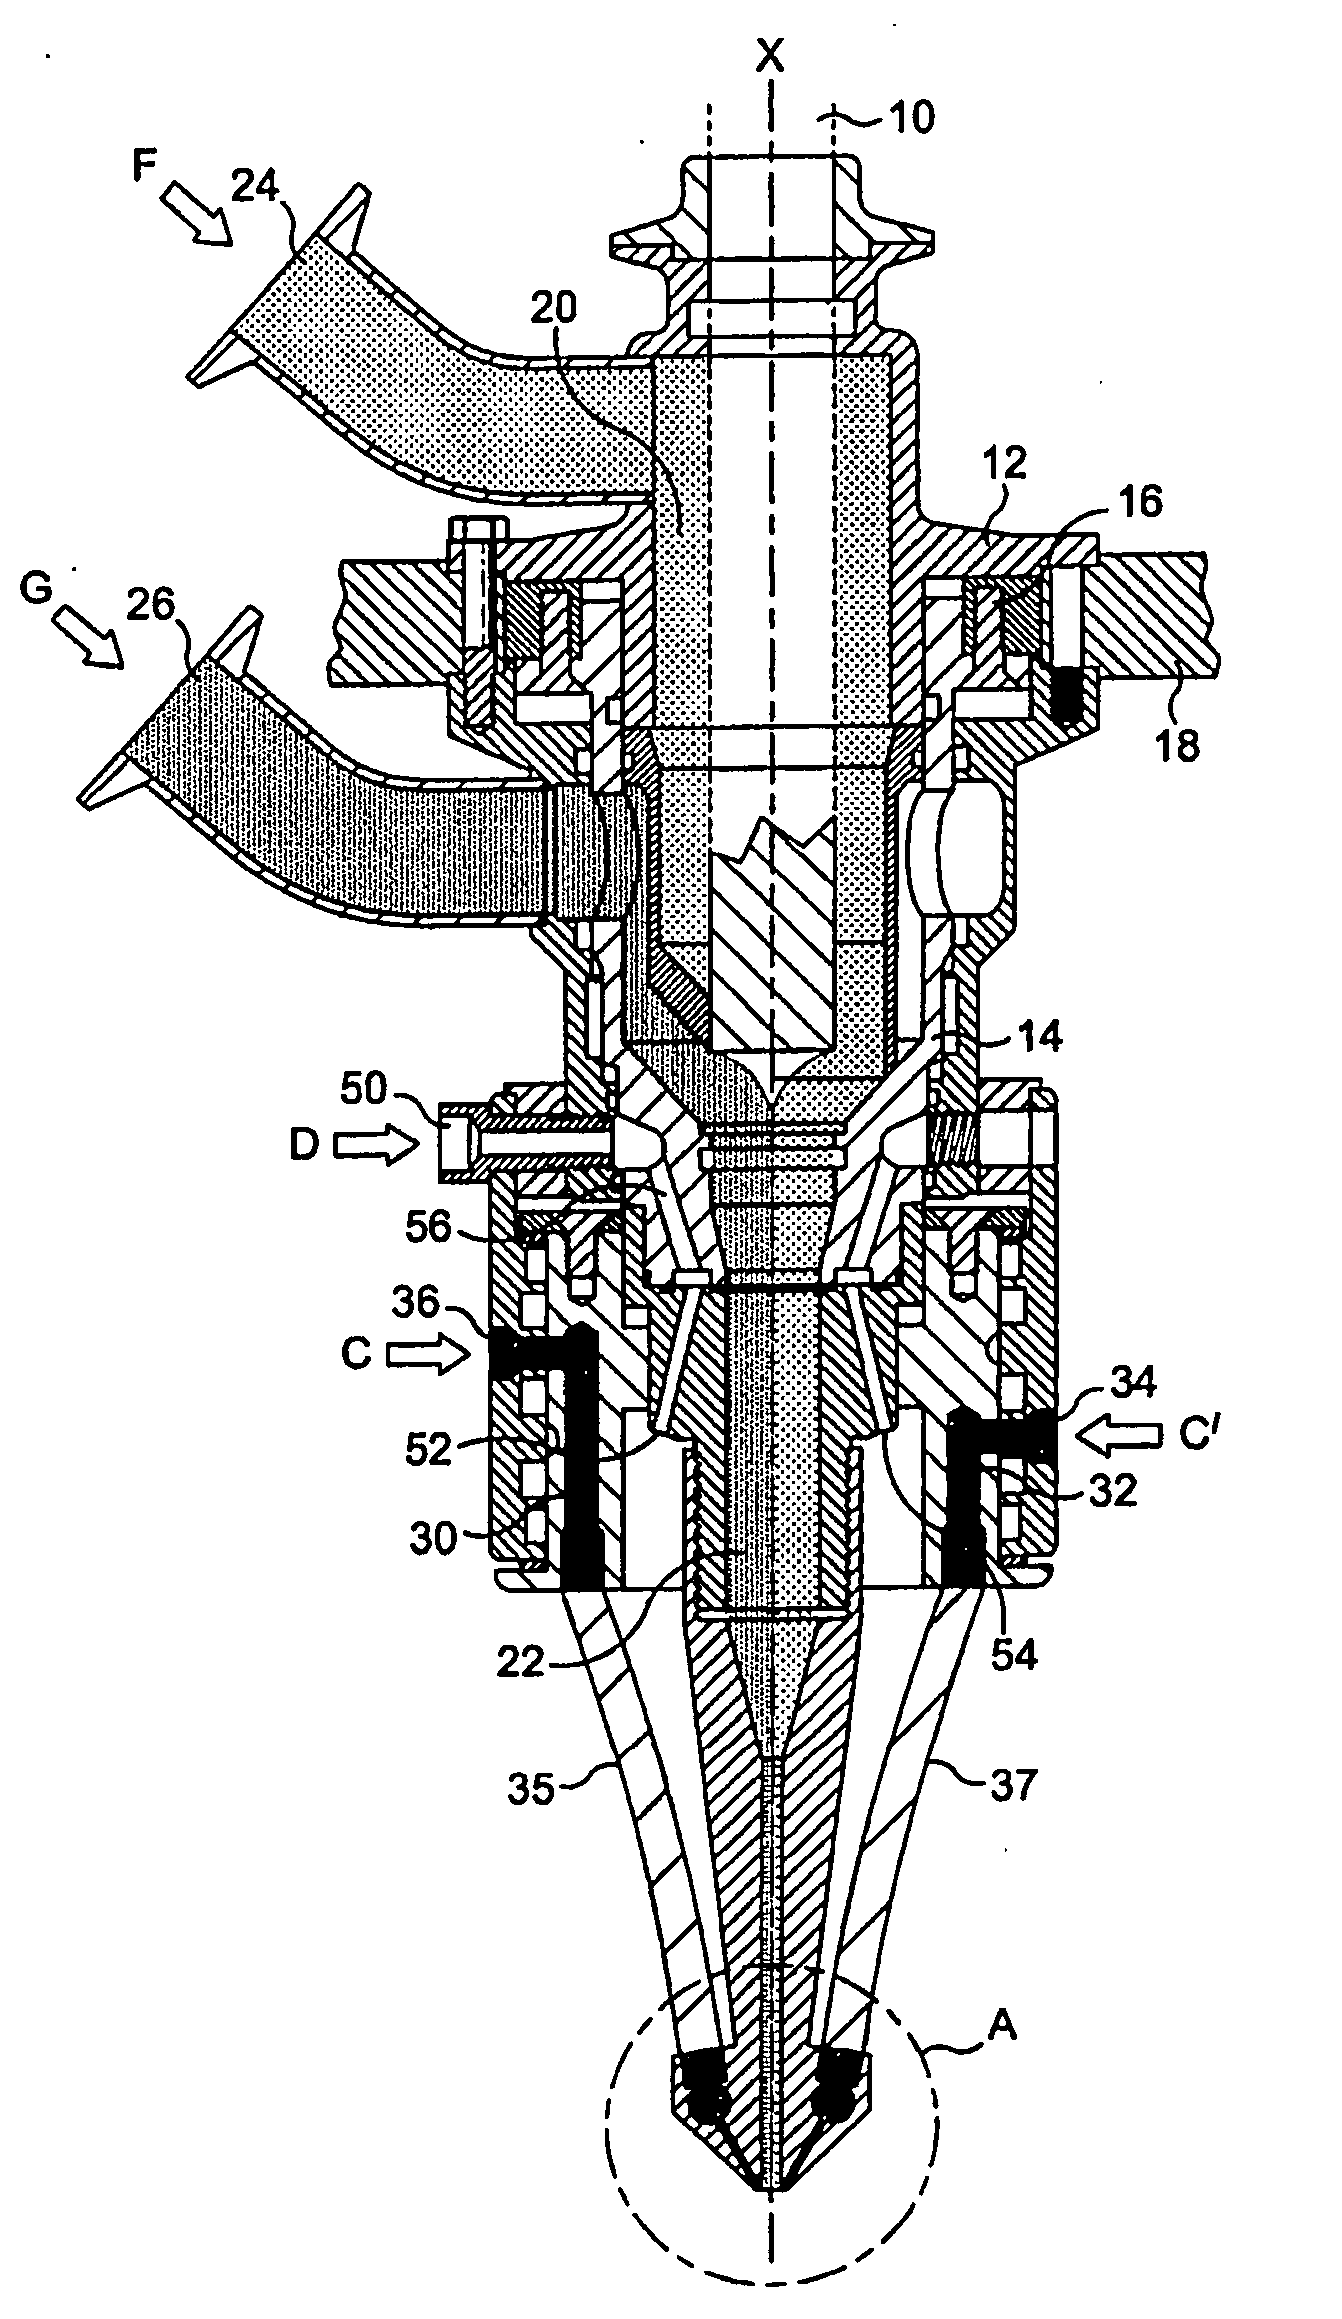 Frozen confectionery product with layered structure and apparatus for manufacturing same